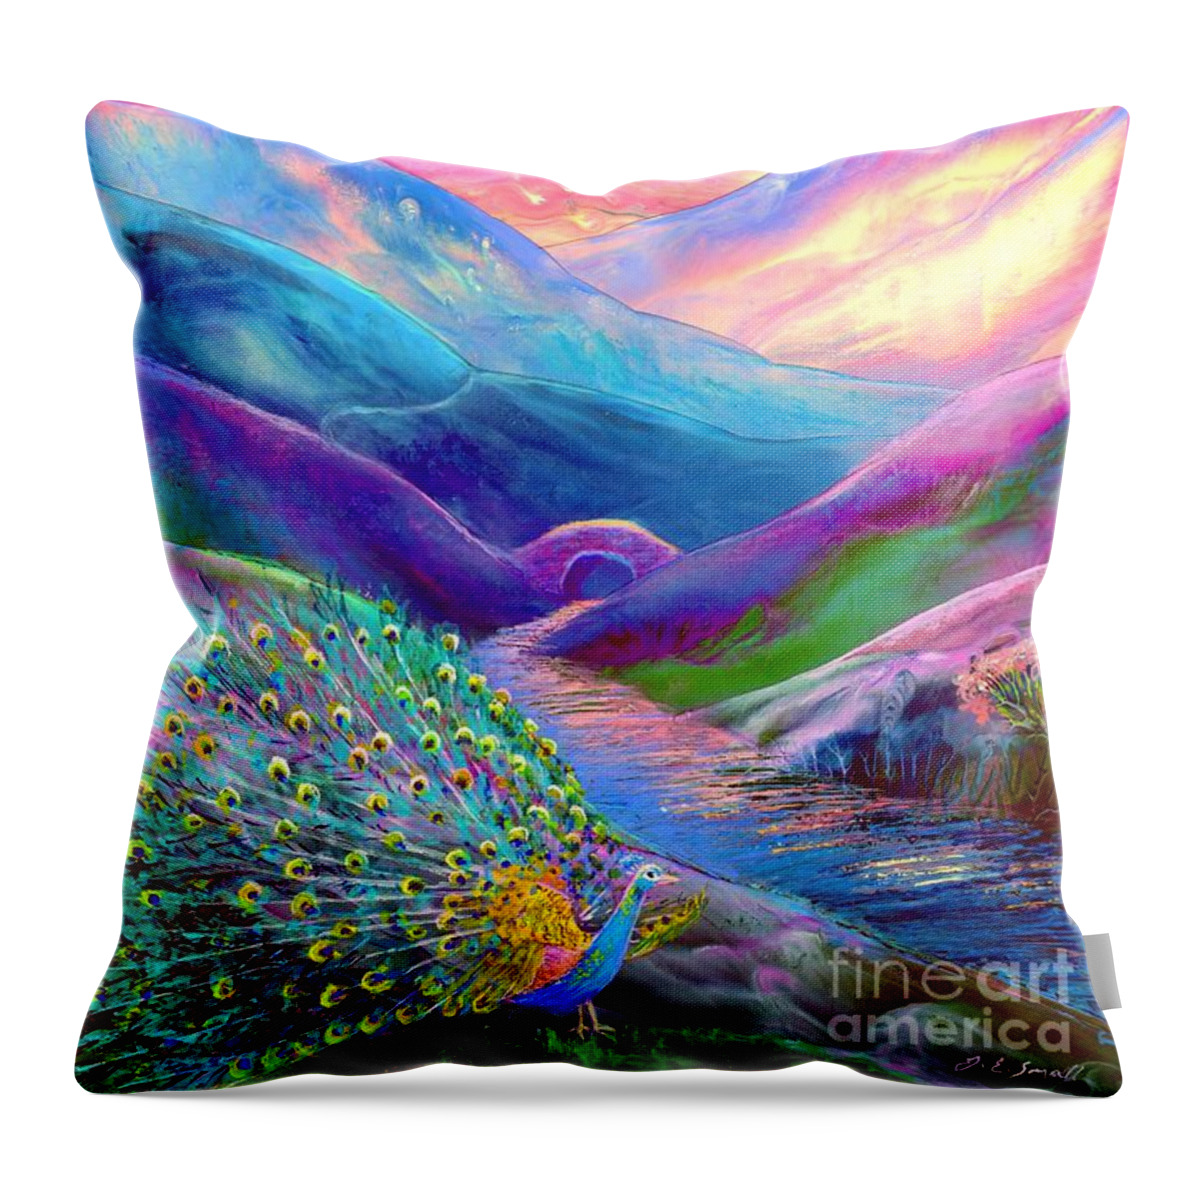 Colorful Throw Pillow featuring the painting Peacock Magic by Jane Small